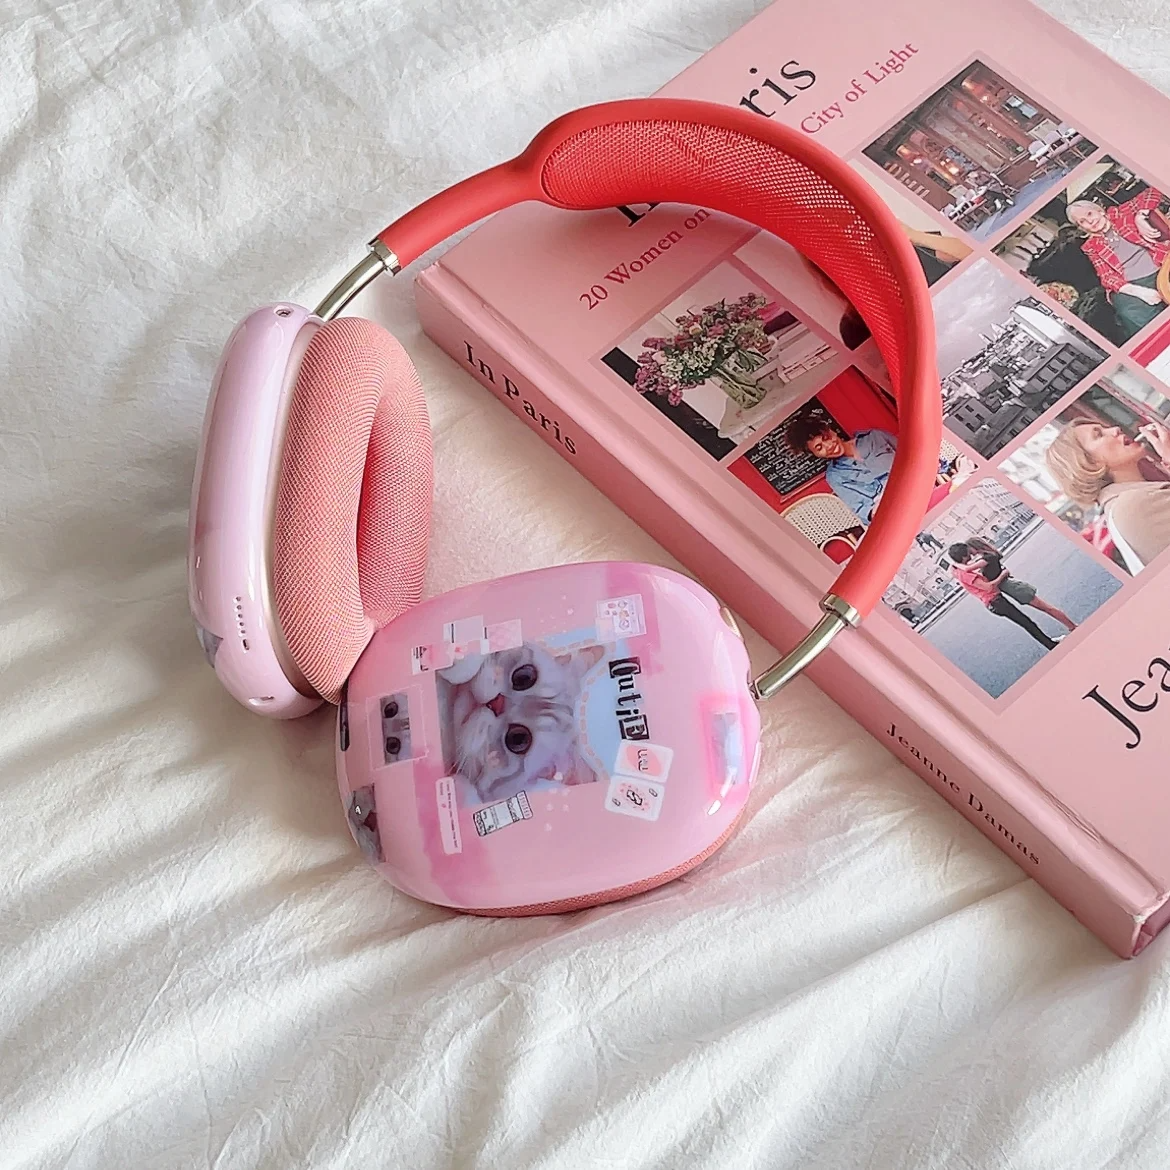 y2k Cat Photo Collage Headphone Covers